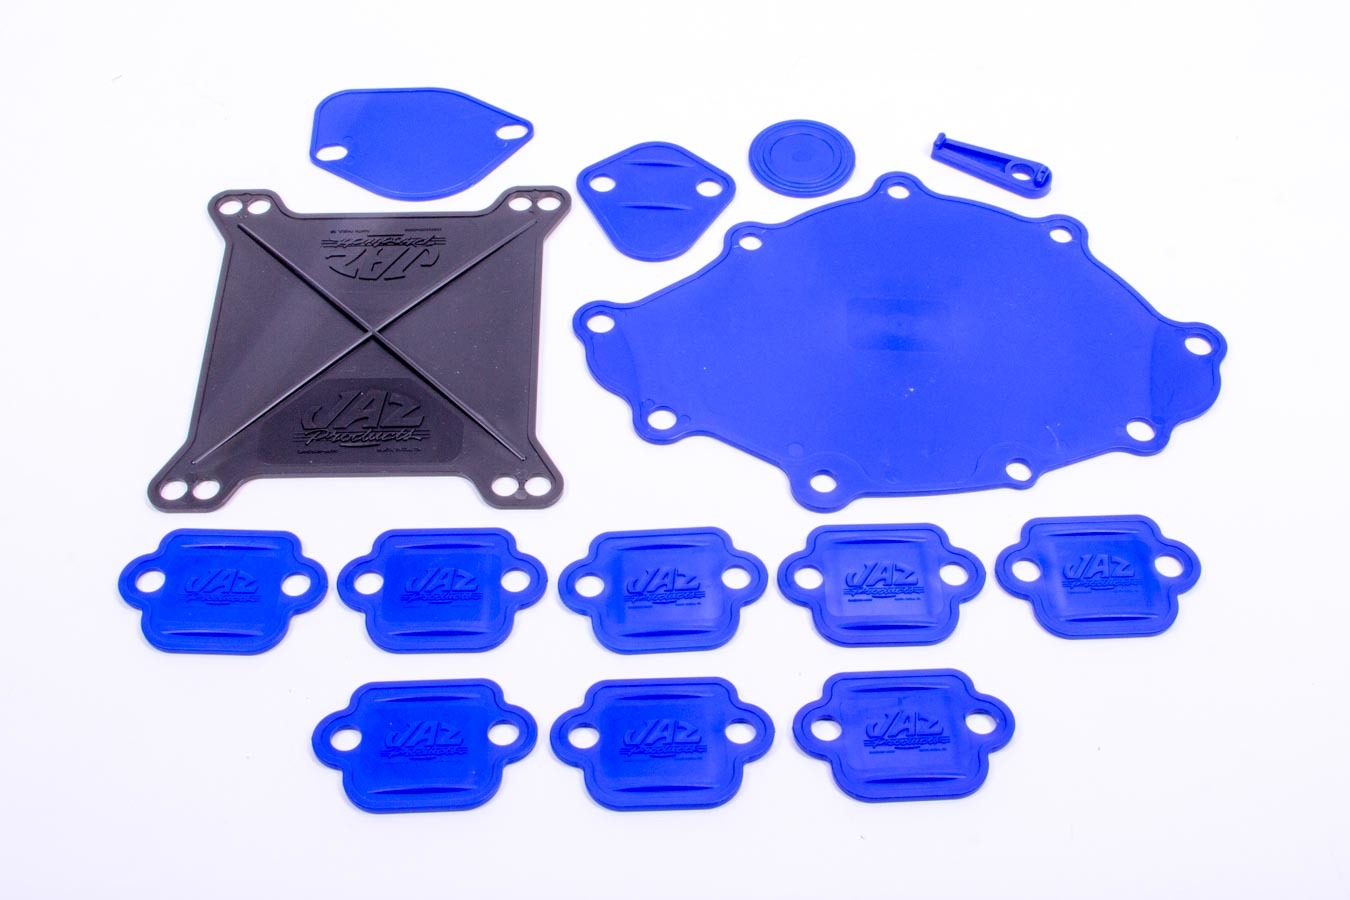 JAZ Products 730-007-01 Engine Blockoff Kit, Intake / Exhaust / Water PUMP / Fuel Pump Blockoff Plates, Square Bore / Small Block Ford, Kit